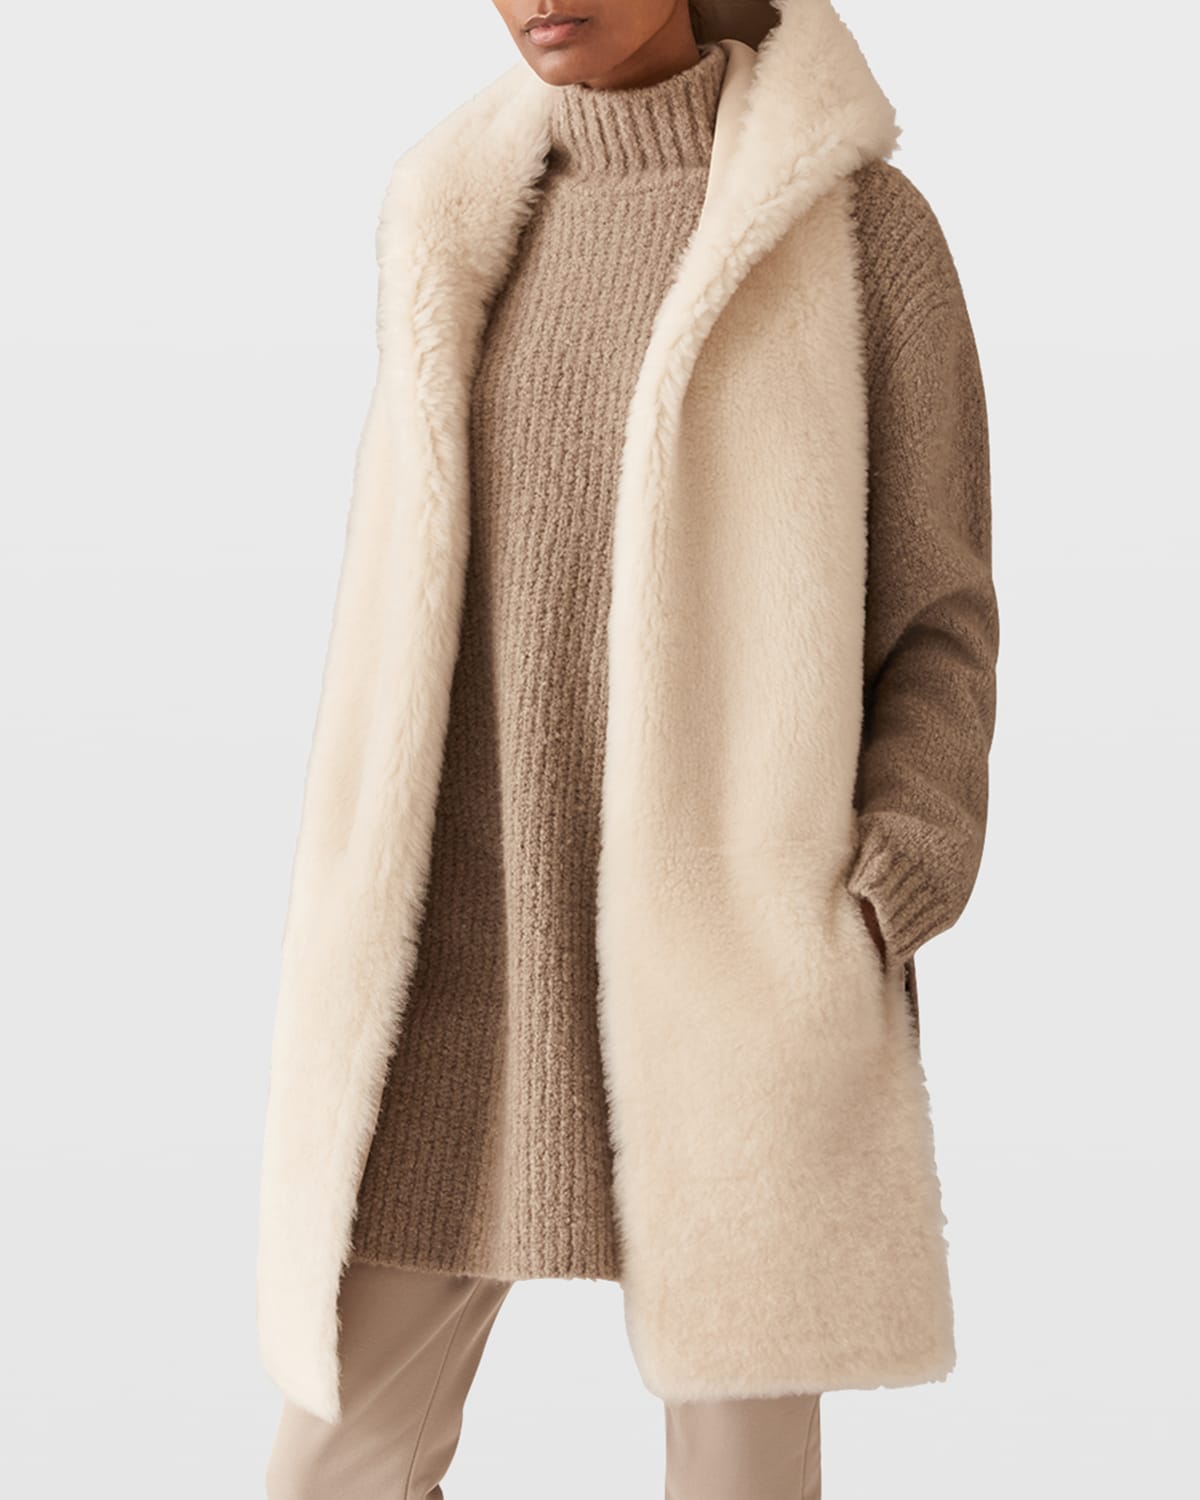 Hooded Light Cloud Shearling Scarf